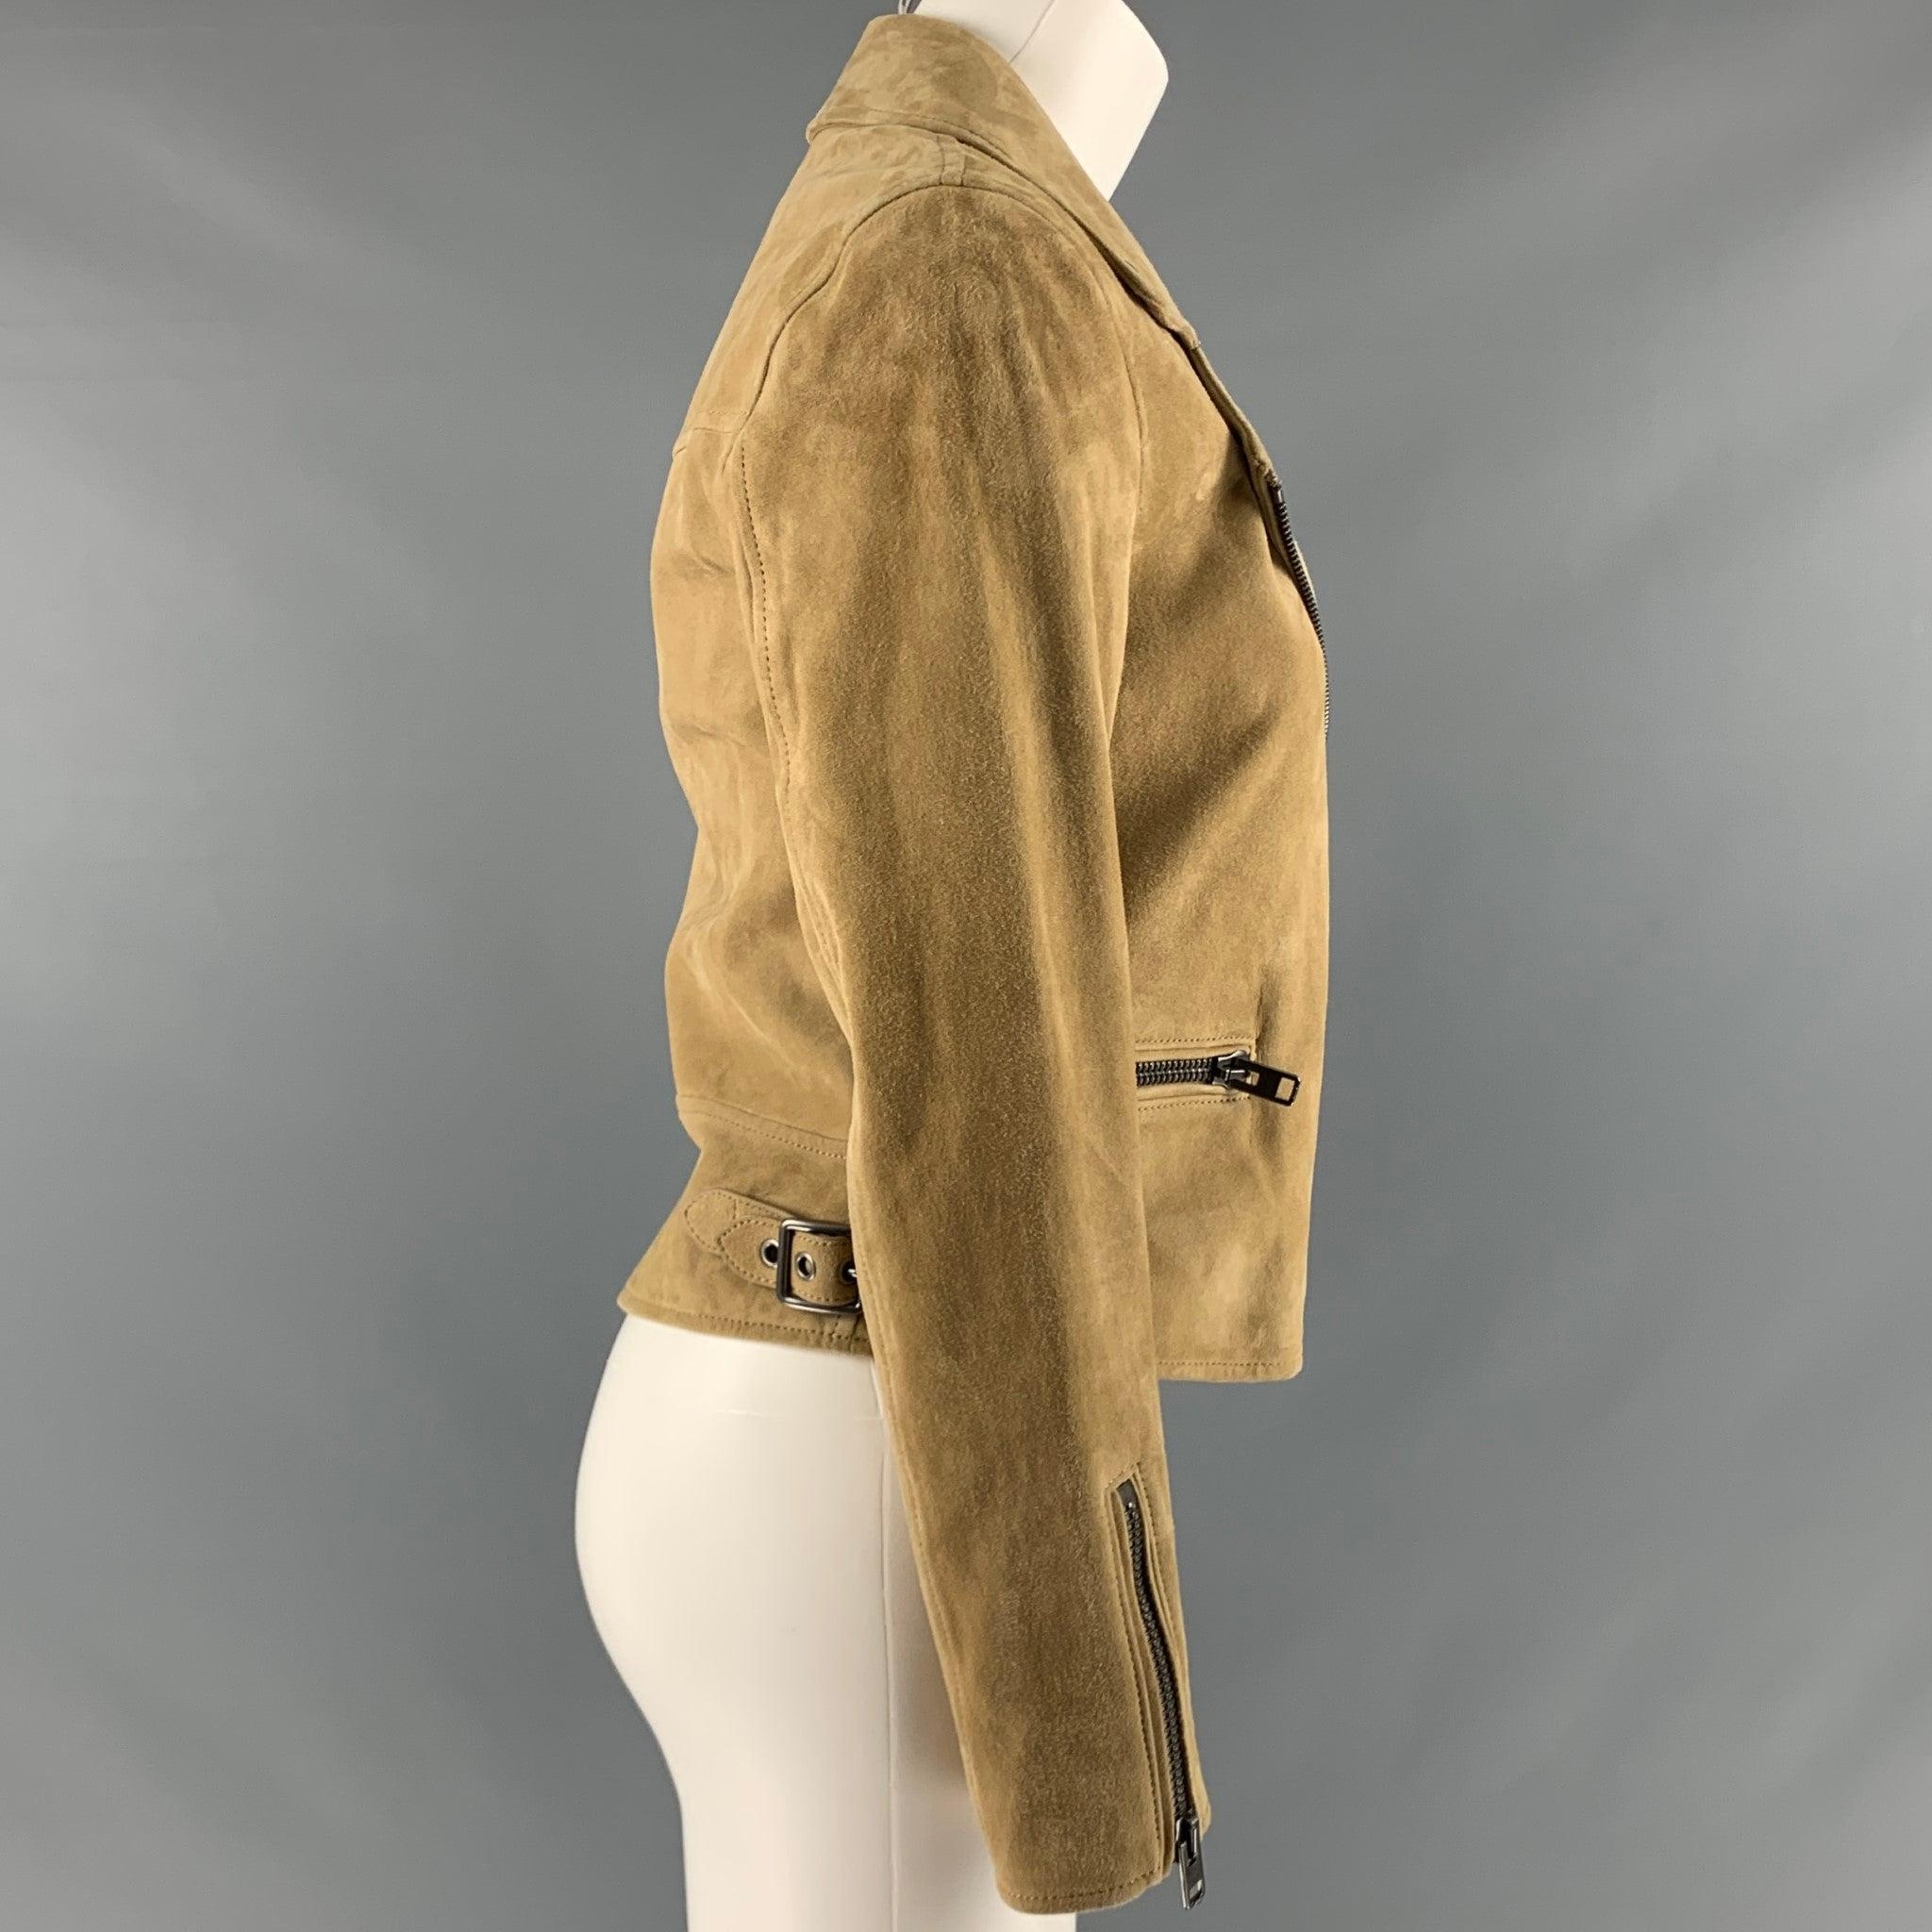 COACH jacket
in a tan lamb skin suede fabric featuring a biker style, zipper pockets, and a zip up closure.Excellent Pre-Owned Condition. 

Marked:   Size tag removed. 

Measurements: 
 
Shoulder: 15.5 inches Bust: 34 inches Sleeve: 23 inches